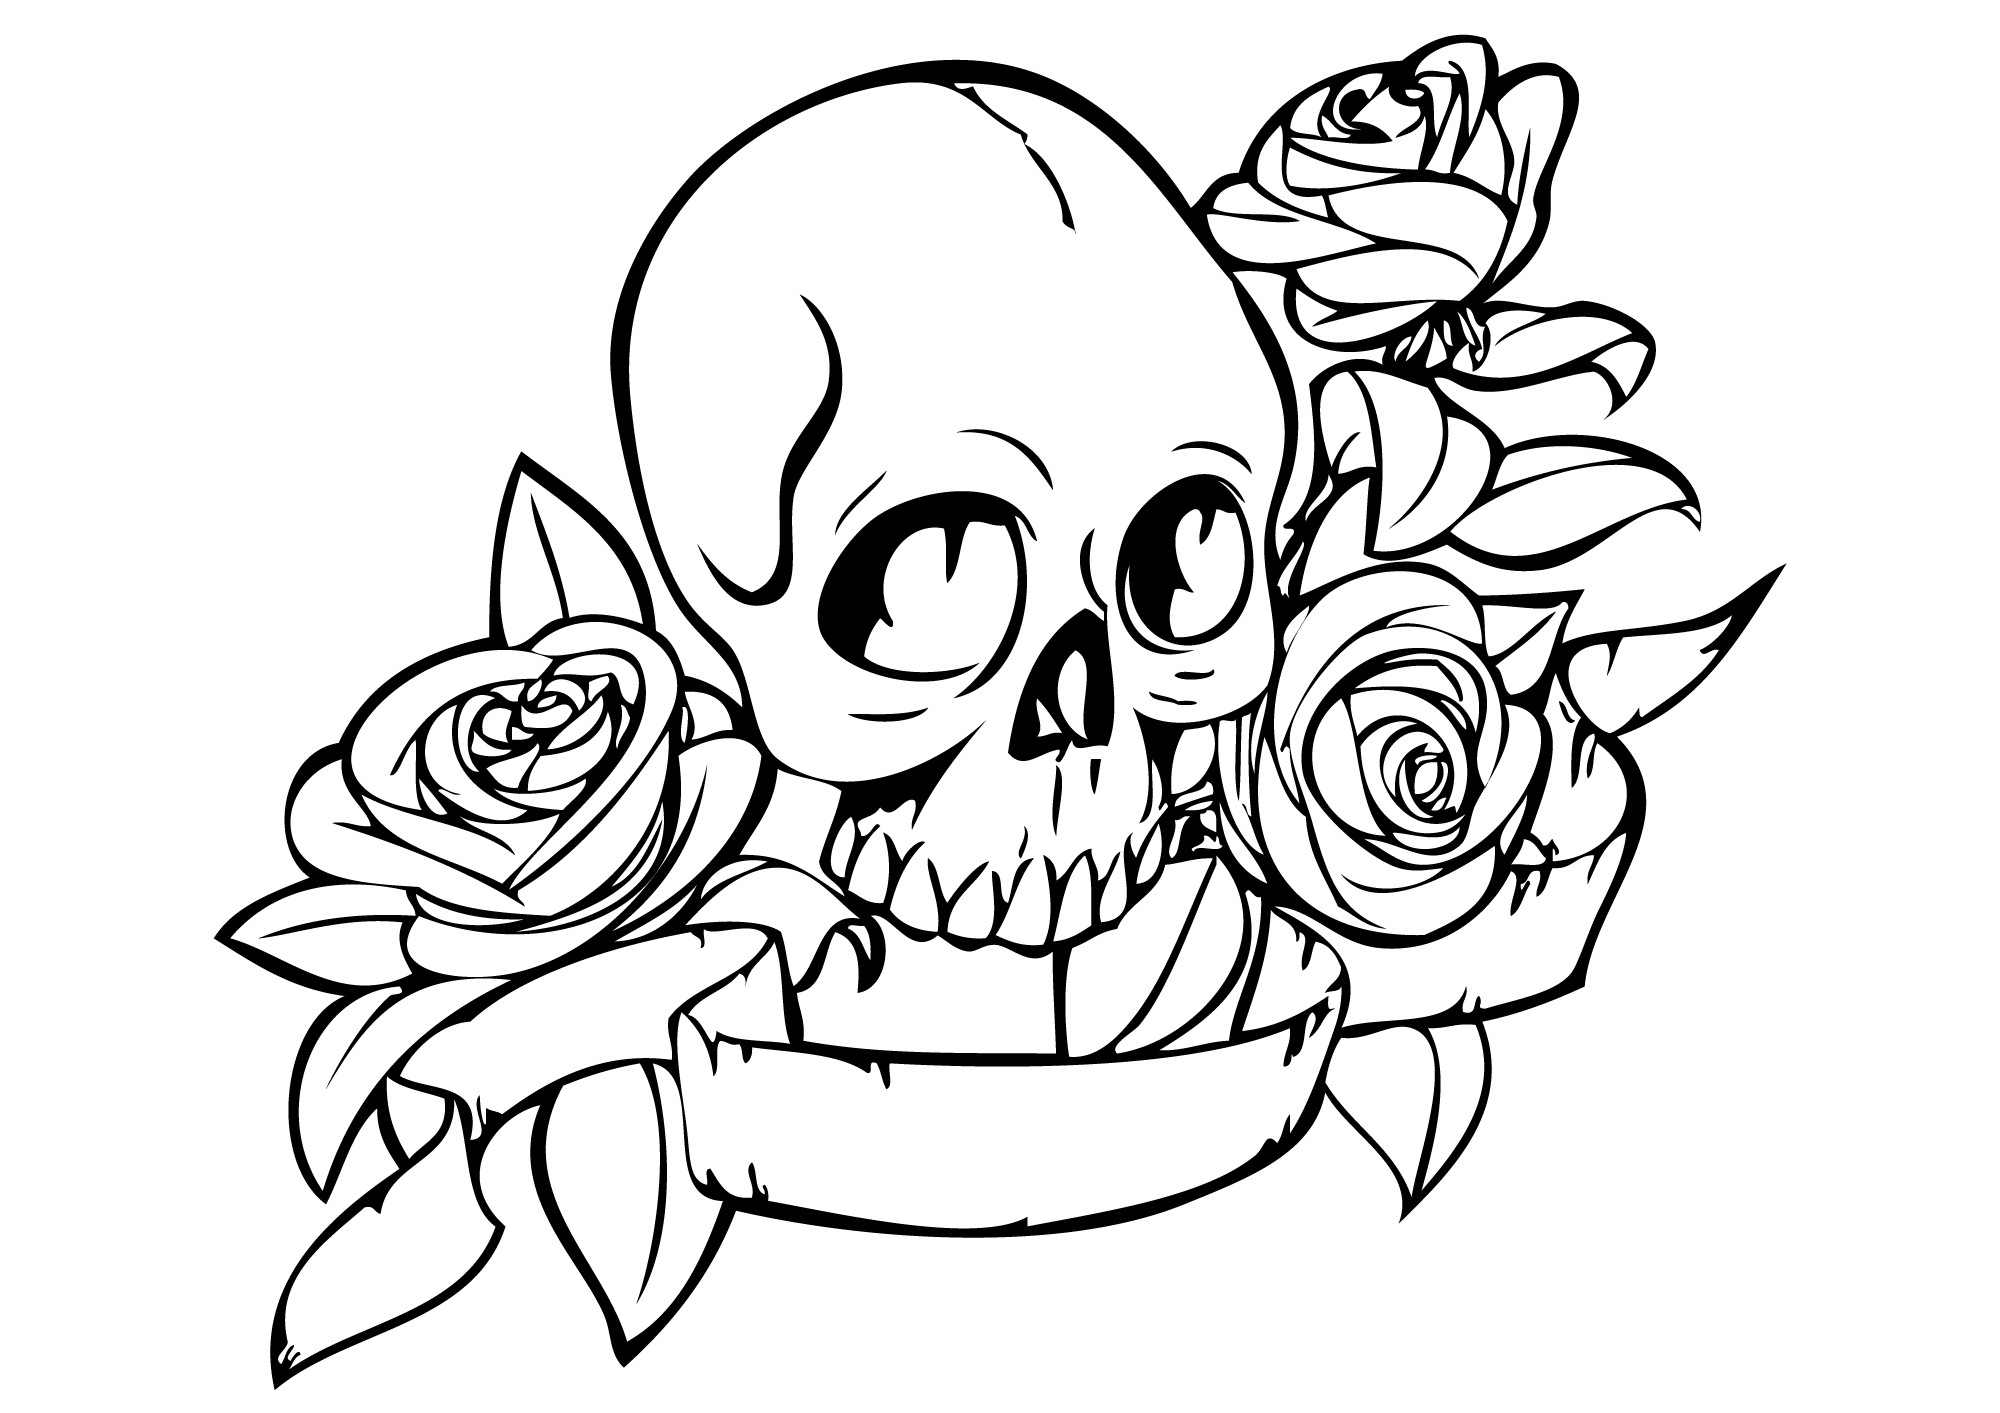 756 Cartoon Skull And Flower Coloring Pages for Kids